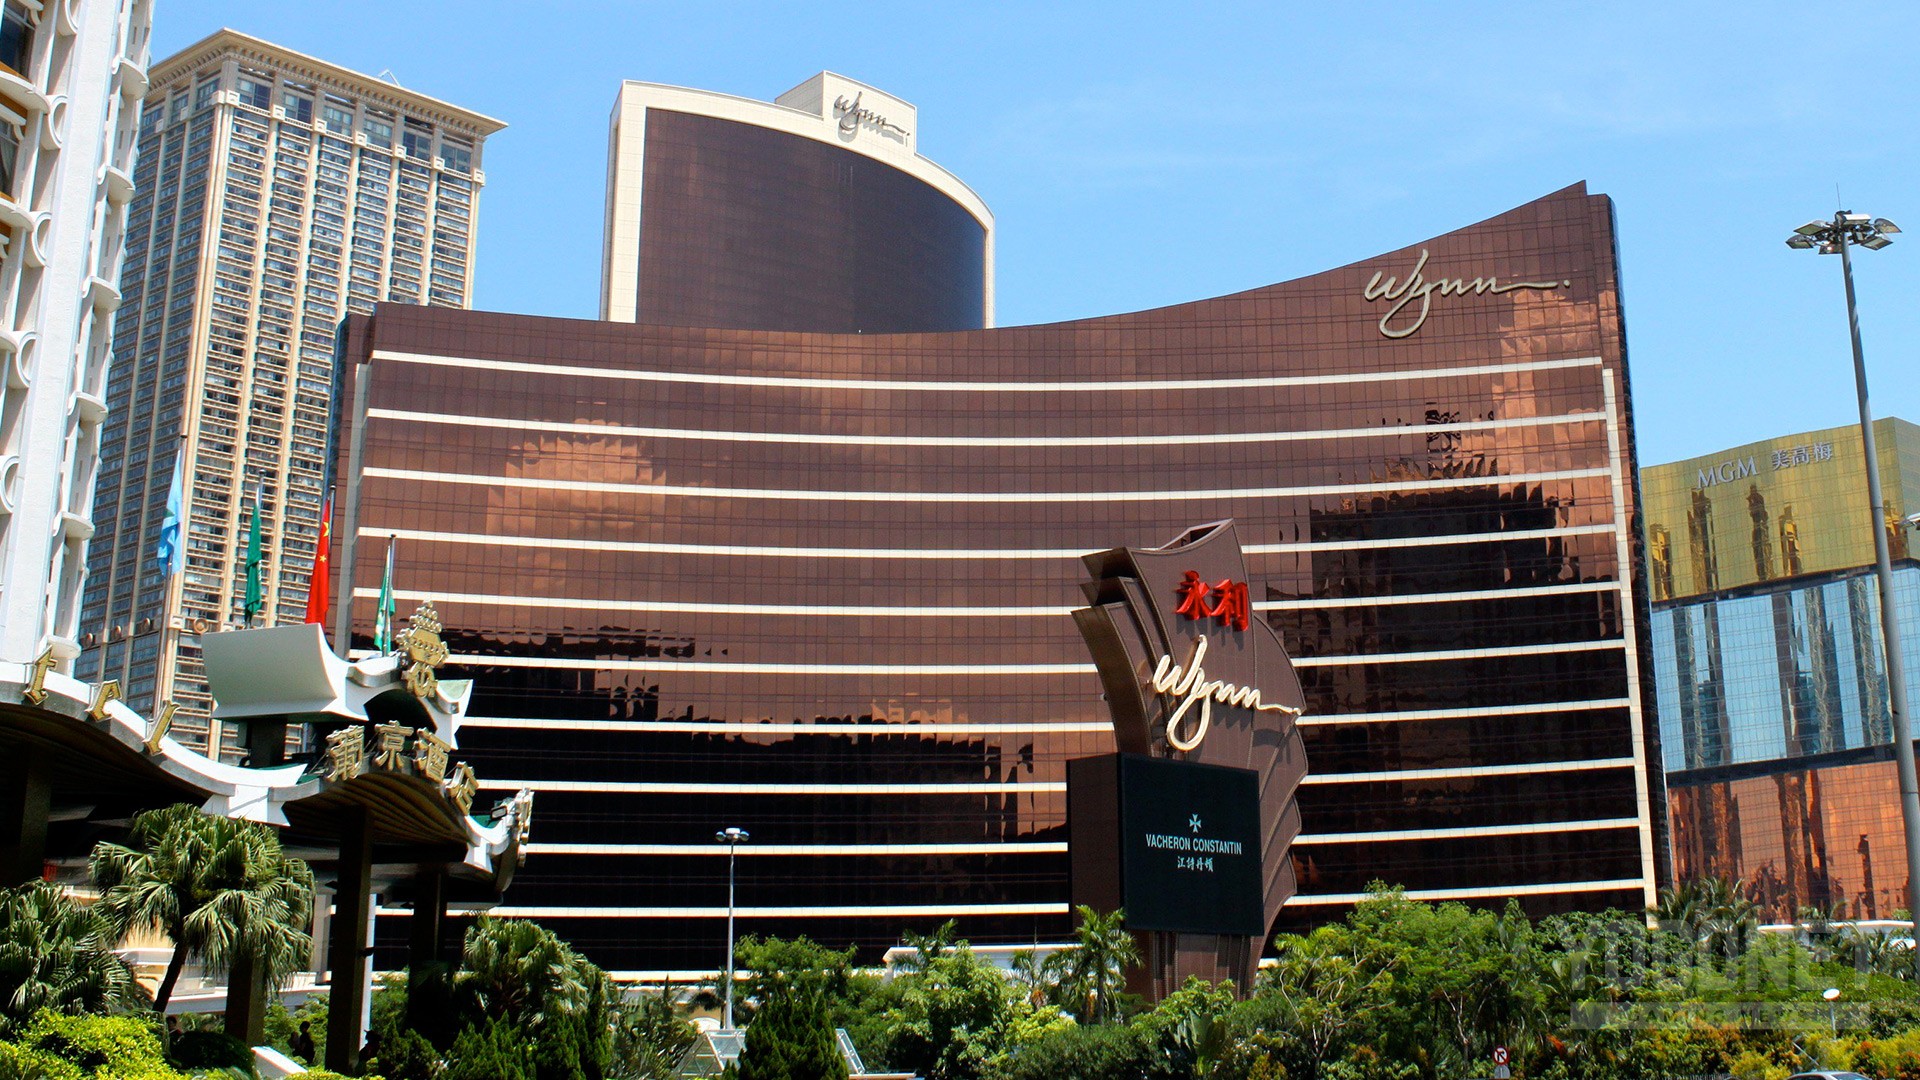 Macau casinos ordered to shut down for the first time in two years amid Covid-19 outbreak